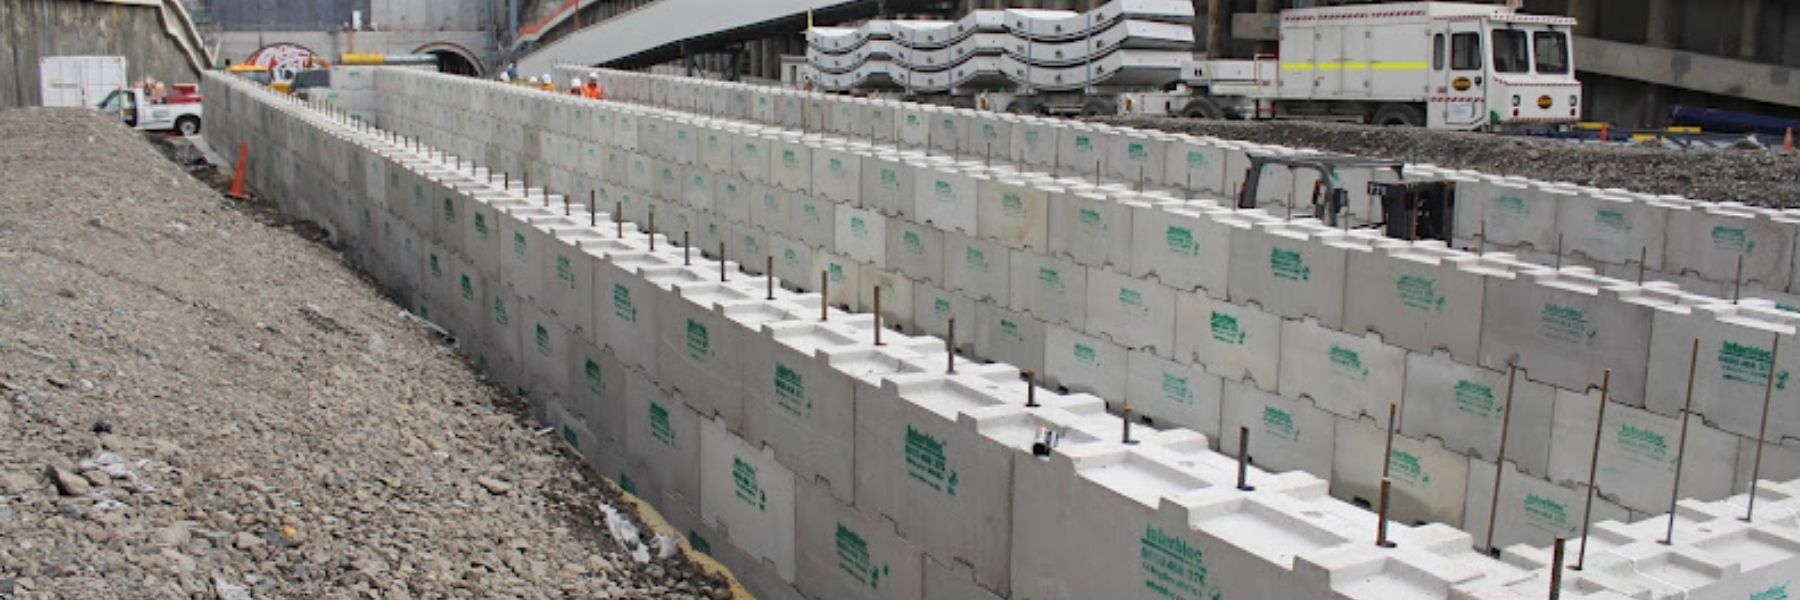 Interbloc concrete blocks used for a settlement pond for the Waterview Tunnel 